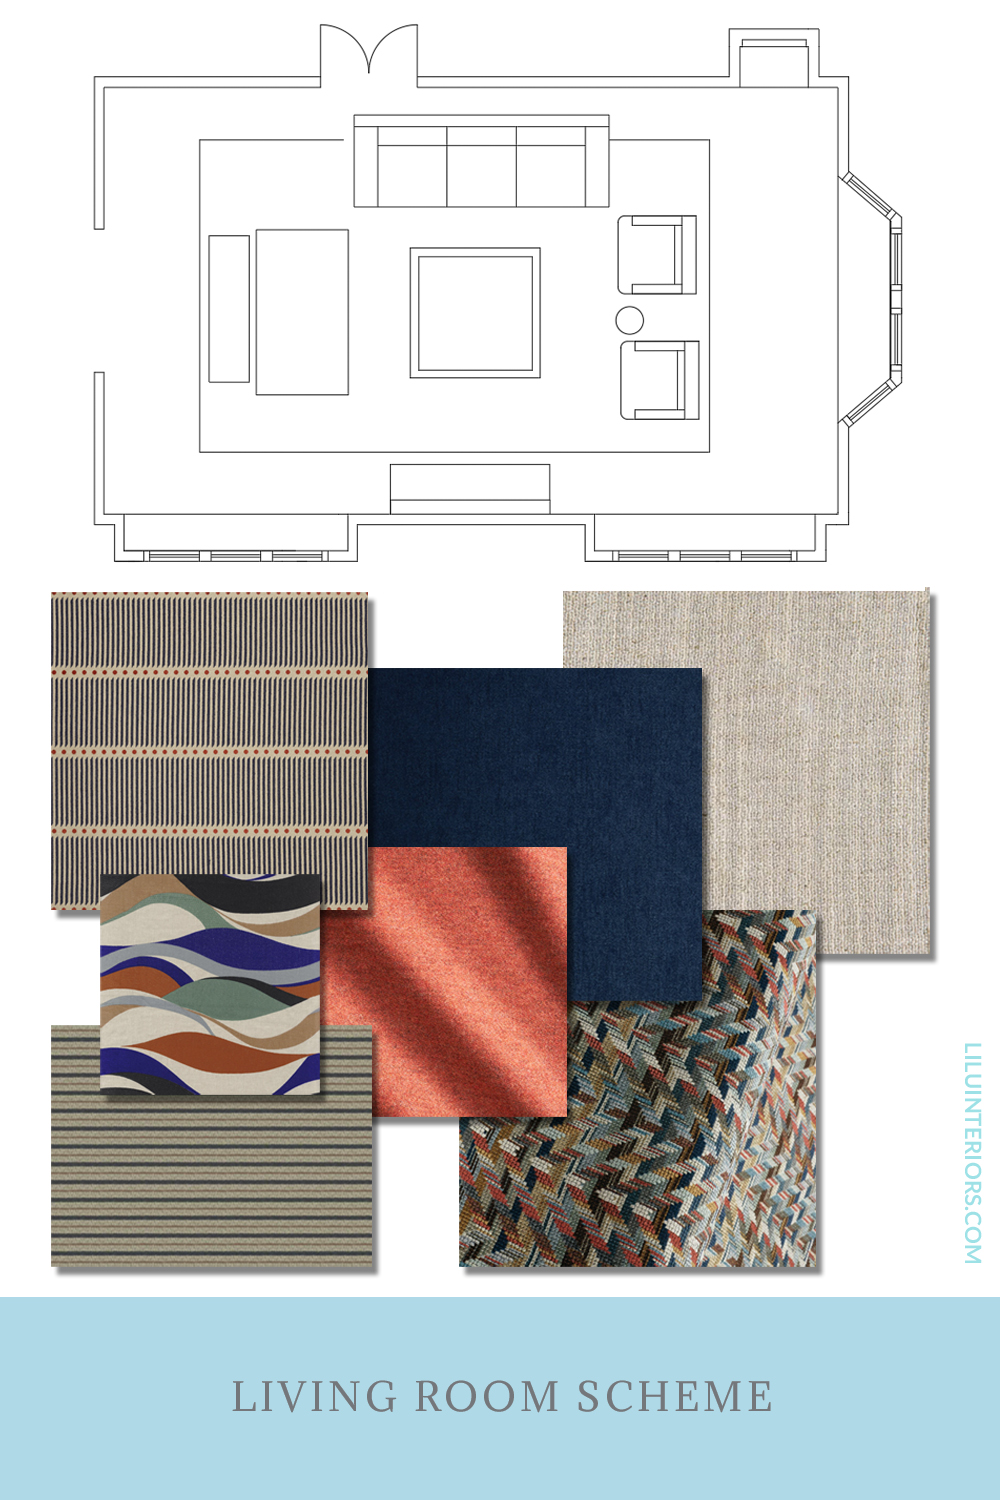 How To Breathe New Life Into A Historic Home By Carefully Curating Modern Elements That Will Update Your Home While Honoring The History Of The Home. The Living Room, Dining Room, Den And Primary Bedroom Now Have New Color Schemes With Blues, Reds And Golds. Modern Furniture And Bold Patterns In Fabrics And Rugs Are Key To This Design.